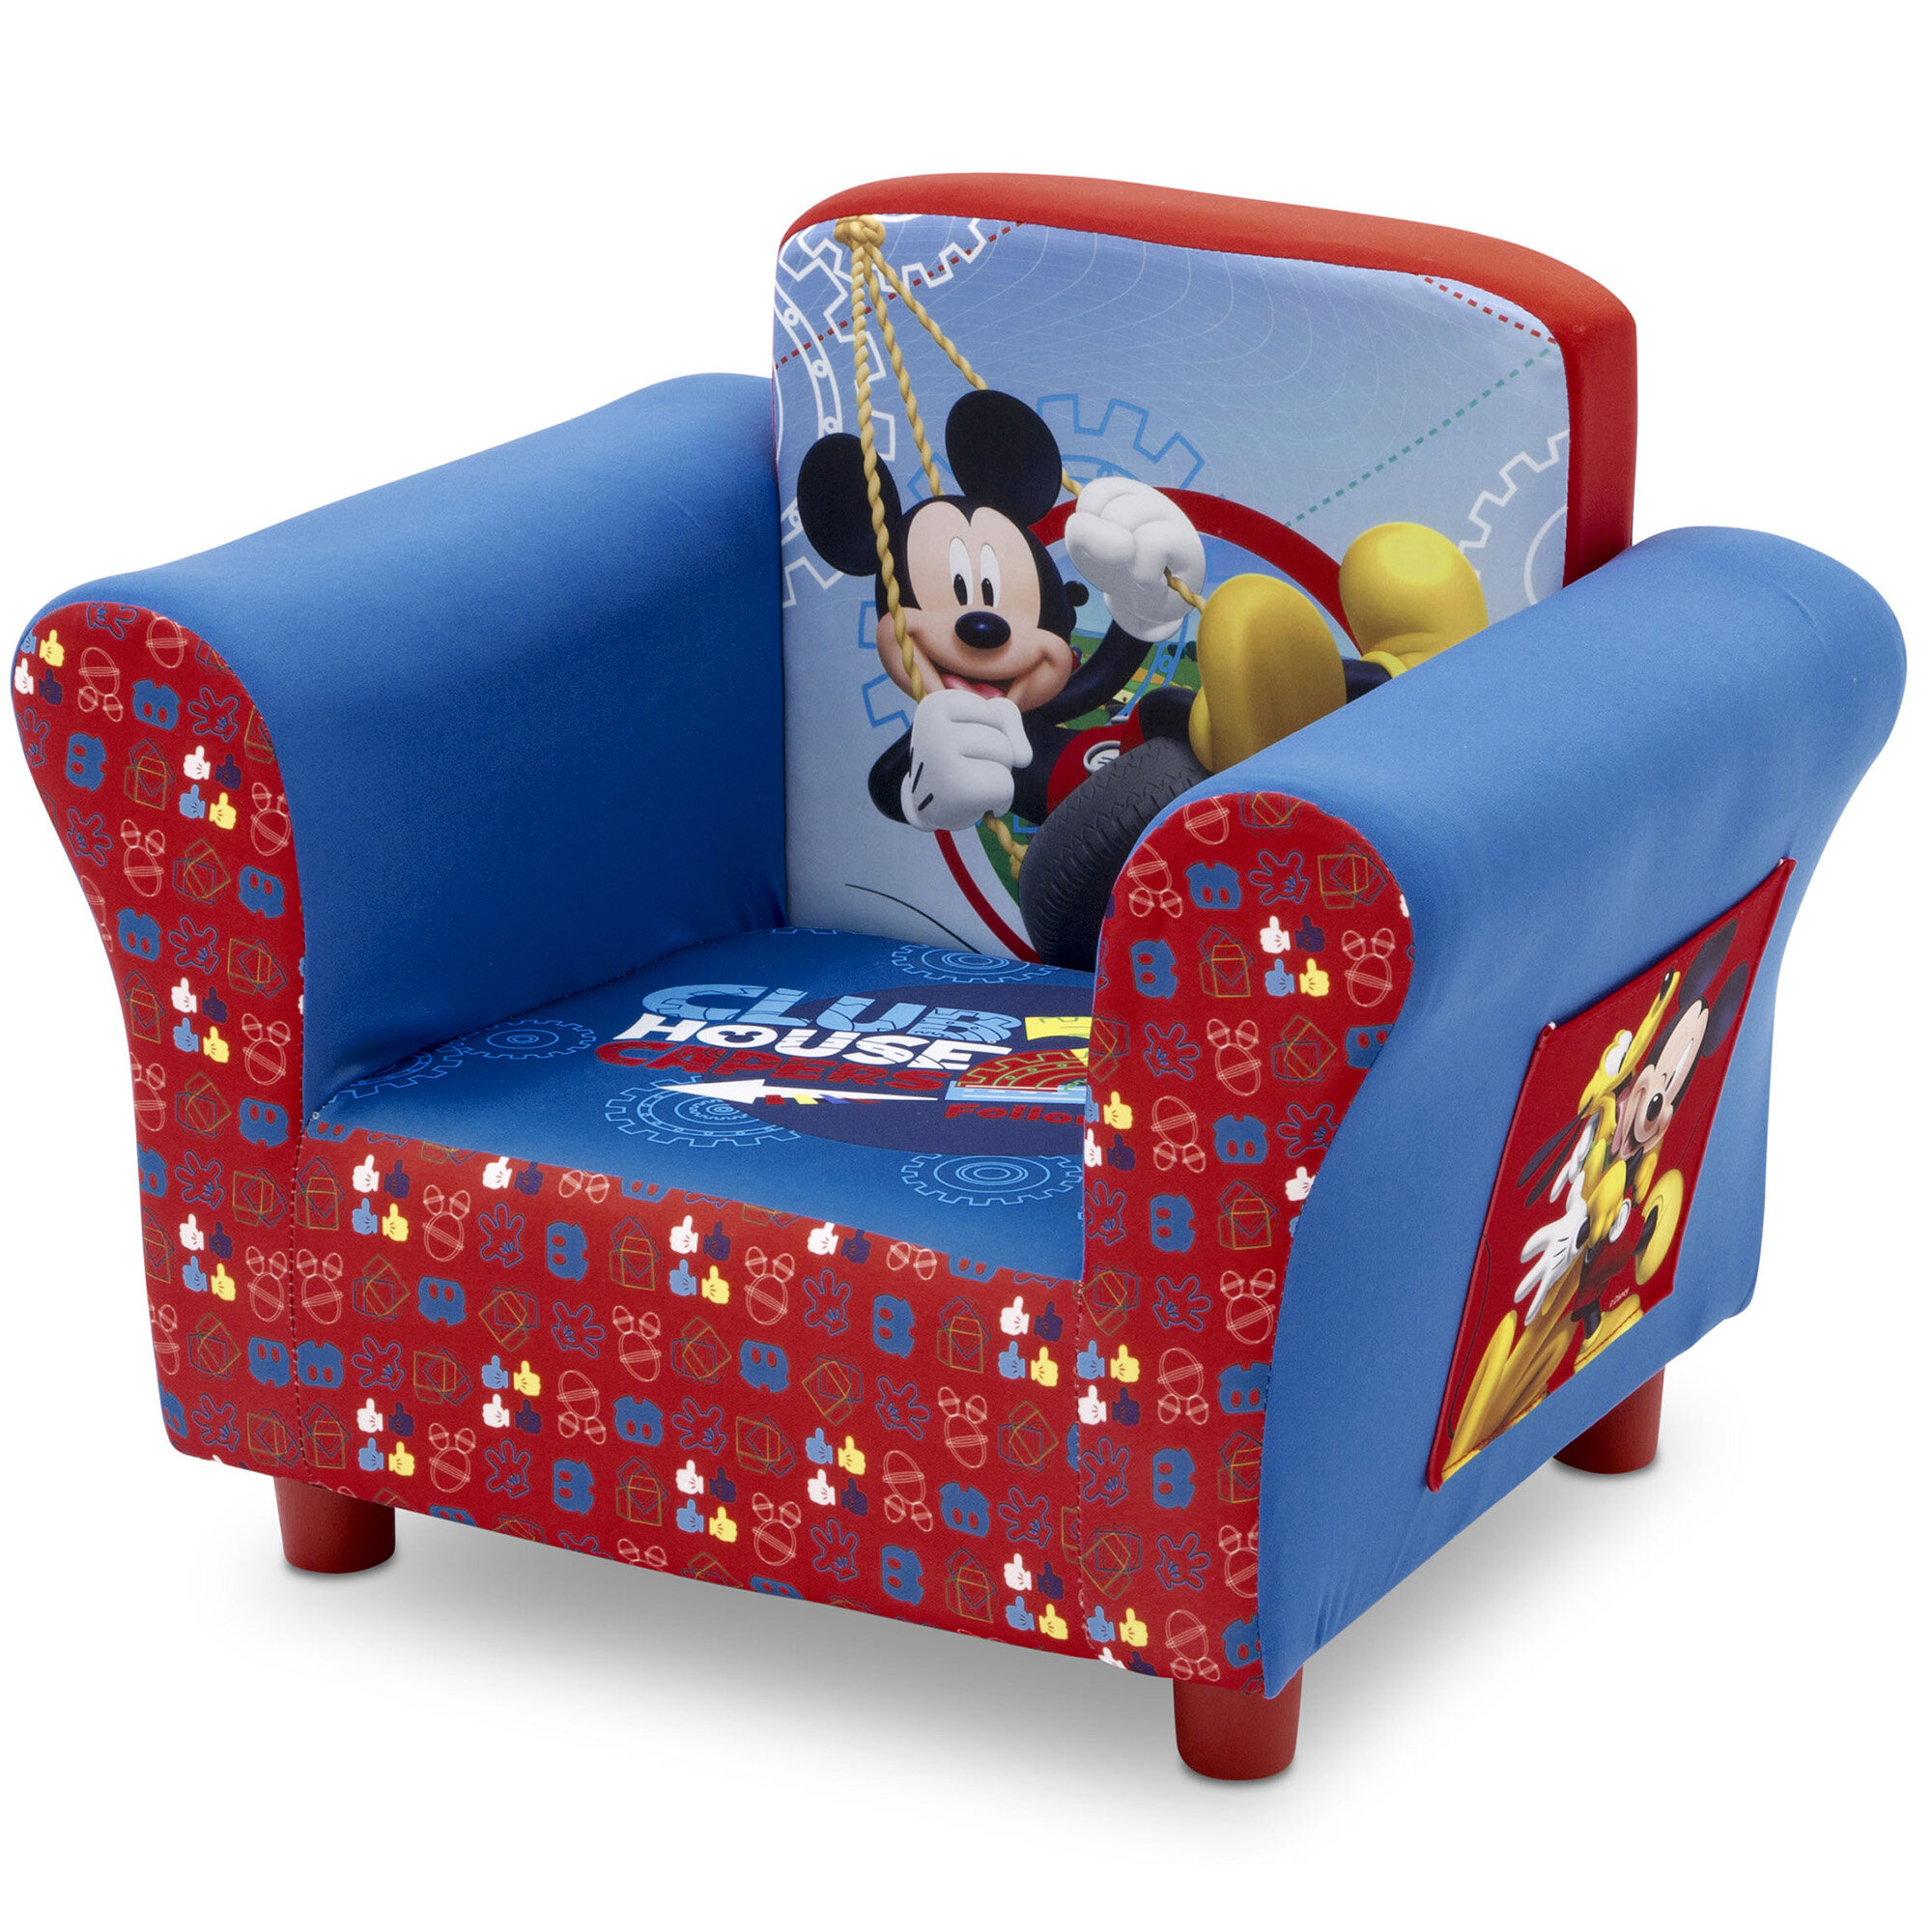 Upholstered Kids Sofa Chair Disney Mickey Mouse for Kids Toddler Room Furniture